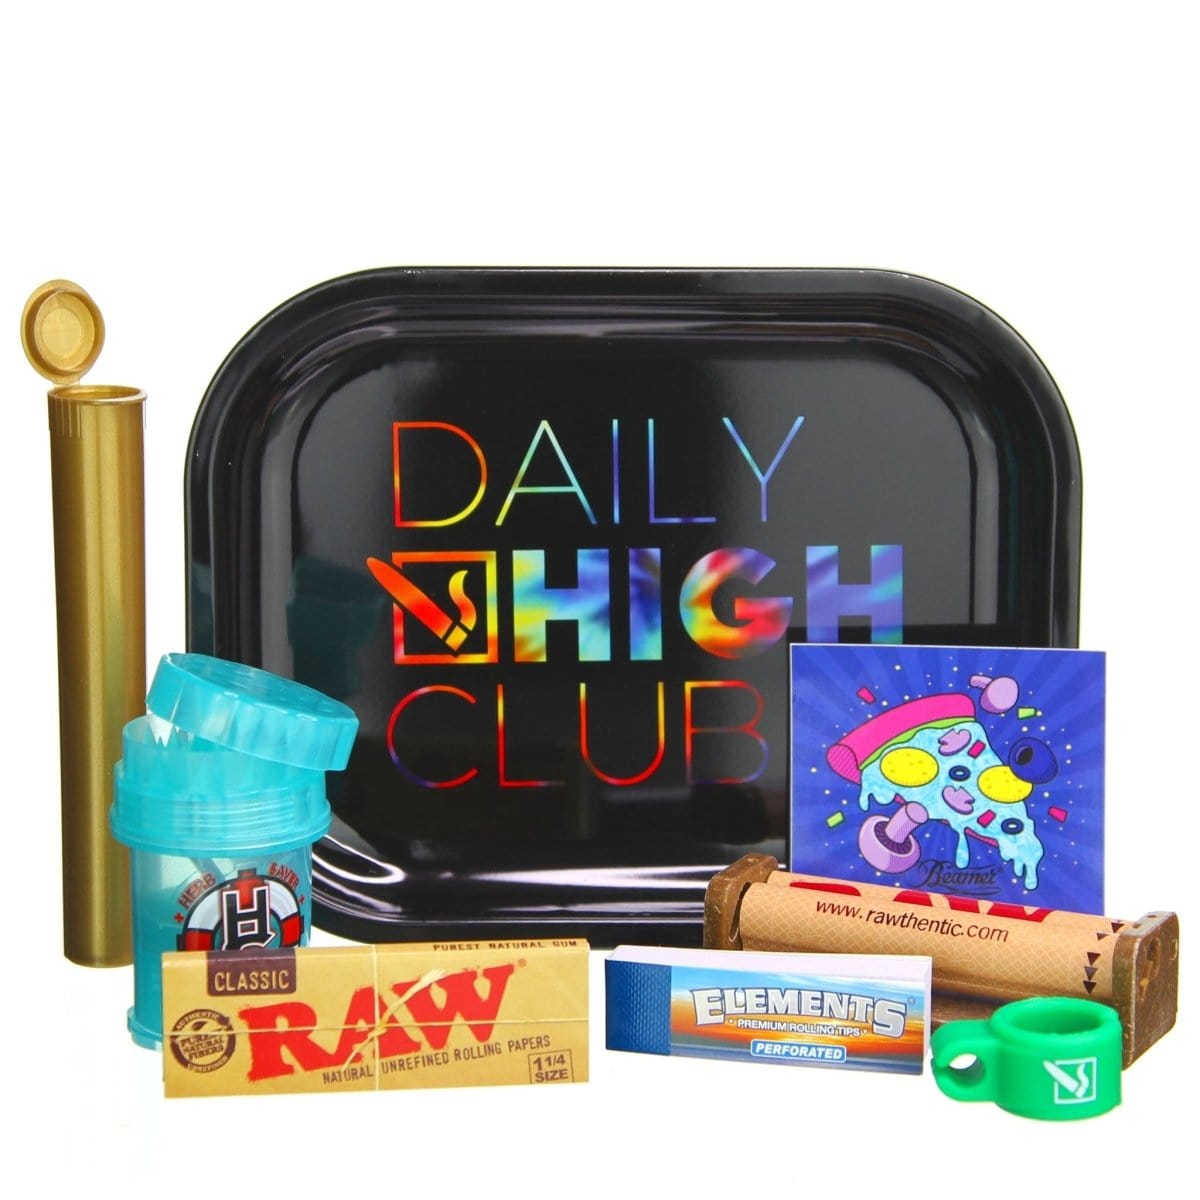 Stoner Smoke Kit - Pipe, Papers, Grinder, Tray, Hemp Wick and More!